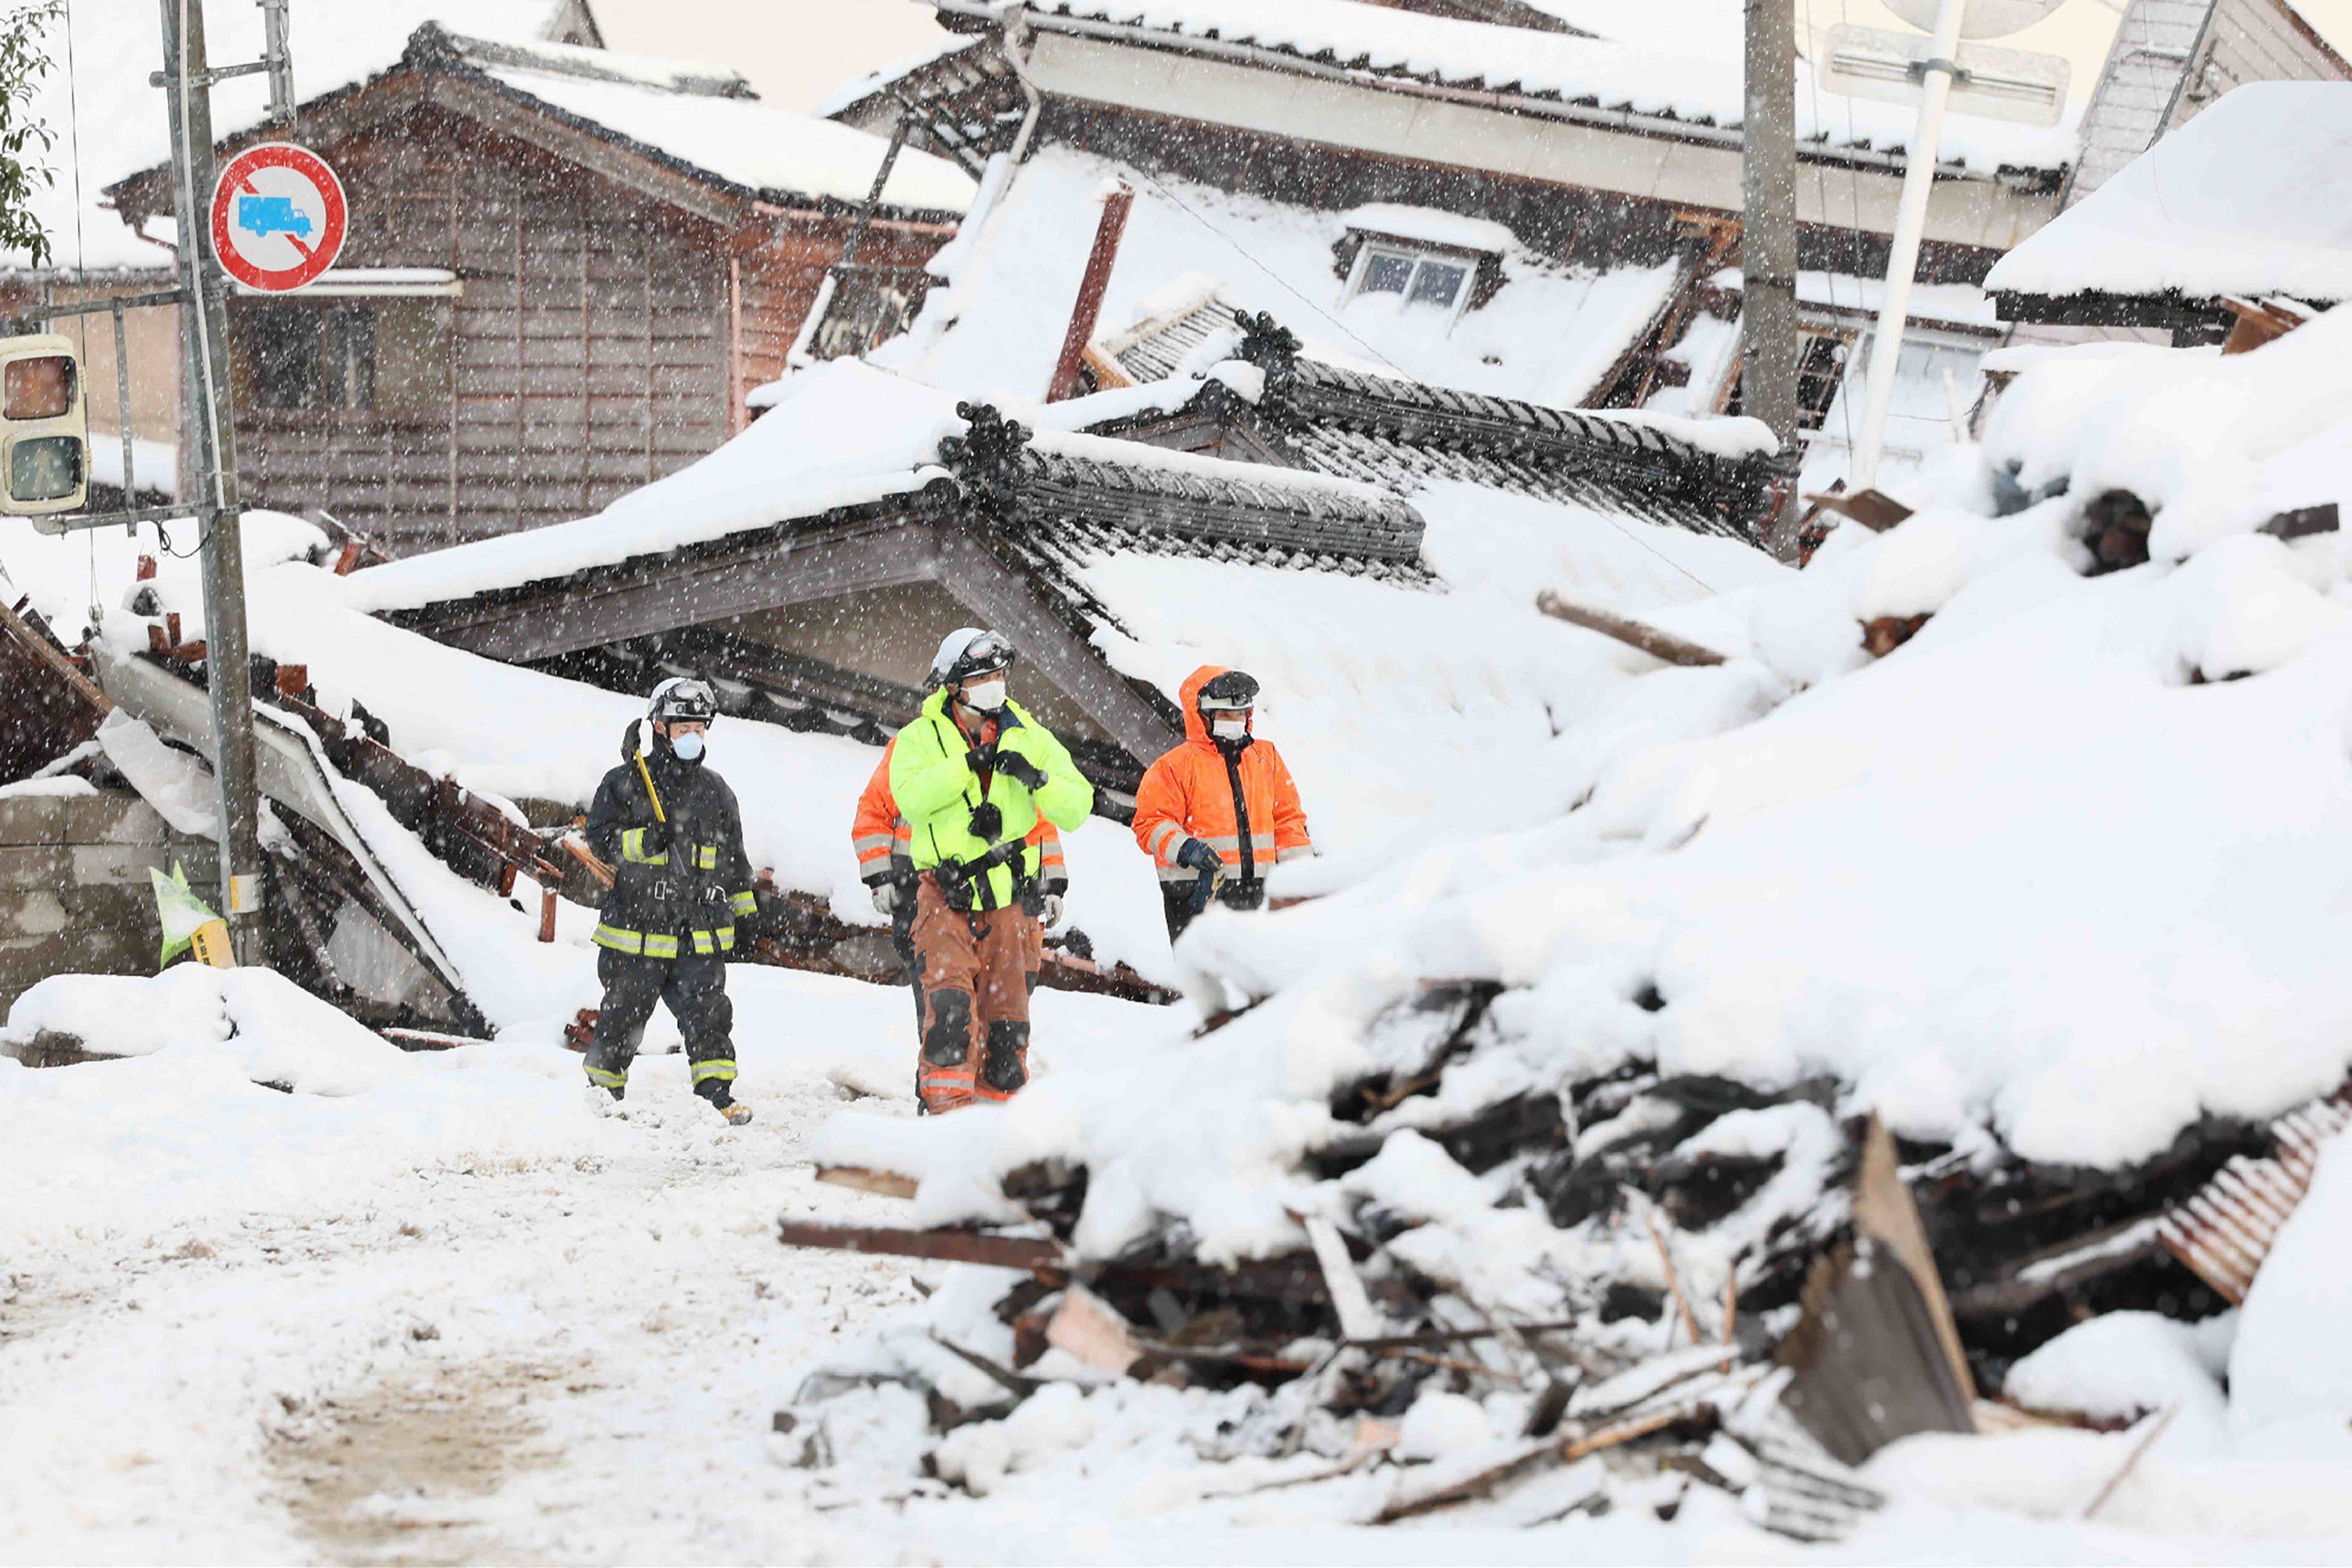 Firefighters search for missing people as snow blankets parts of the disaster-hit area in the city of Suzu, Ishikawa prefecture, a week after a major earthquake struck the Noto region in Ishikawa prefecture on New Year’s Day. Photo: Jiji Press/AFP